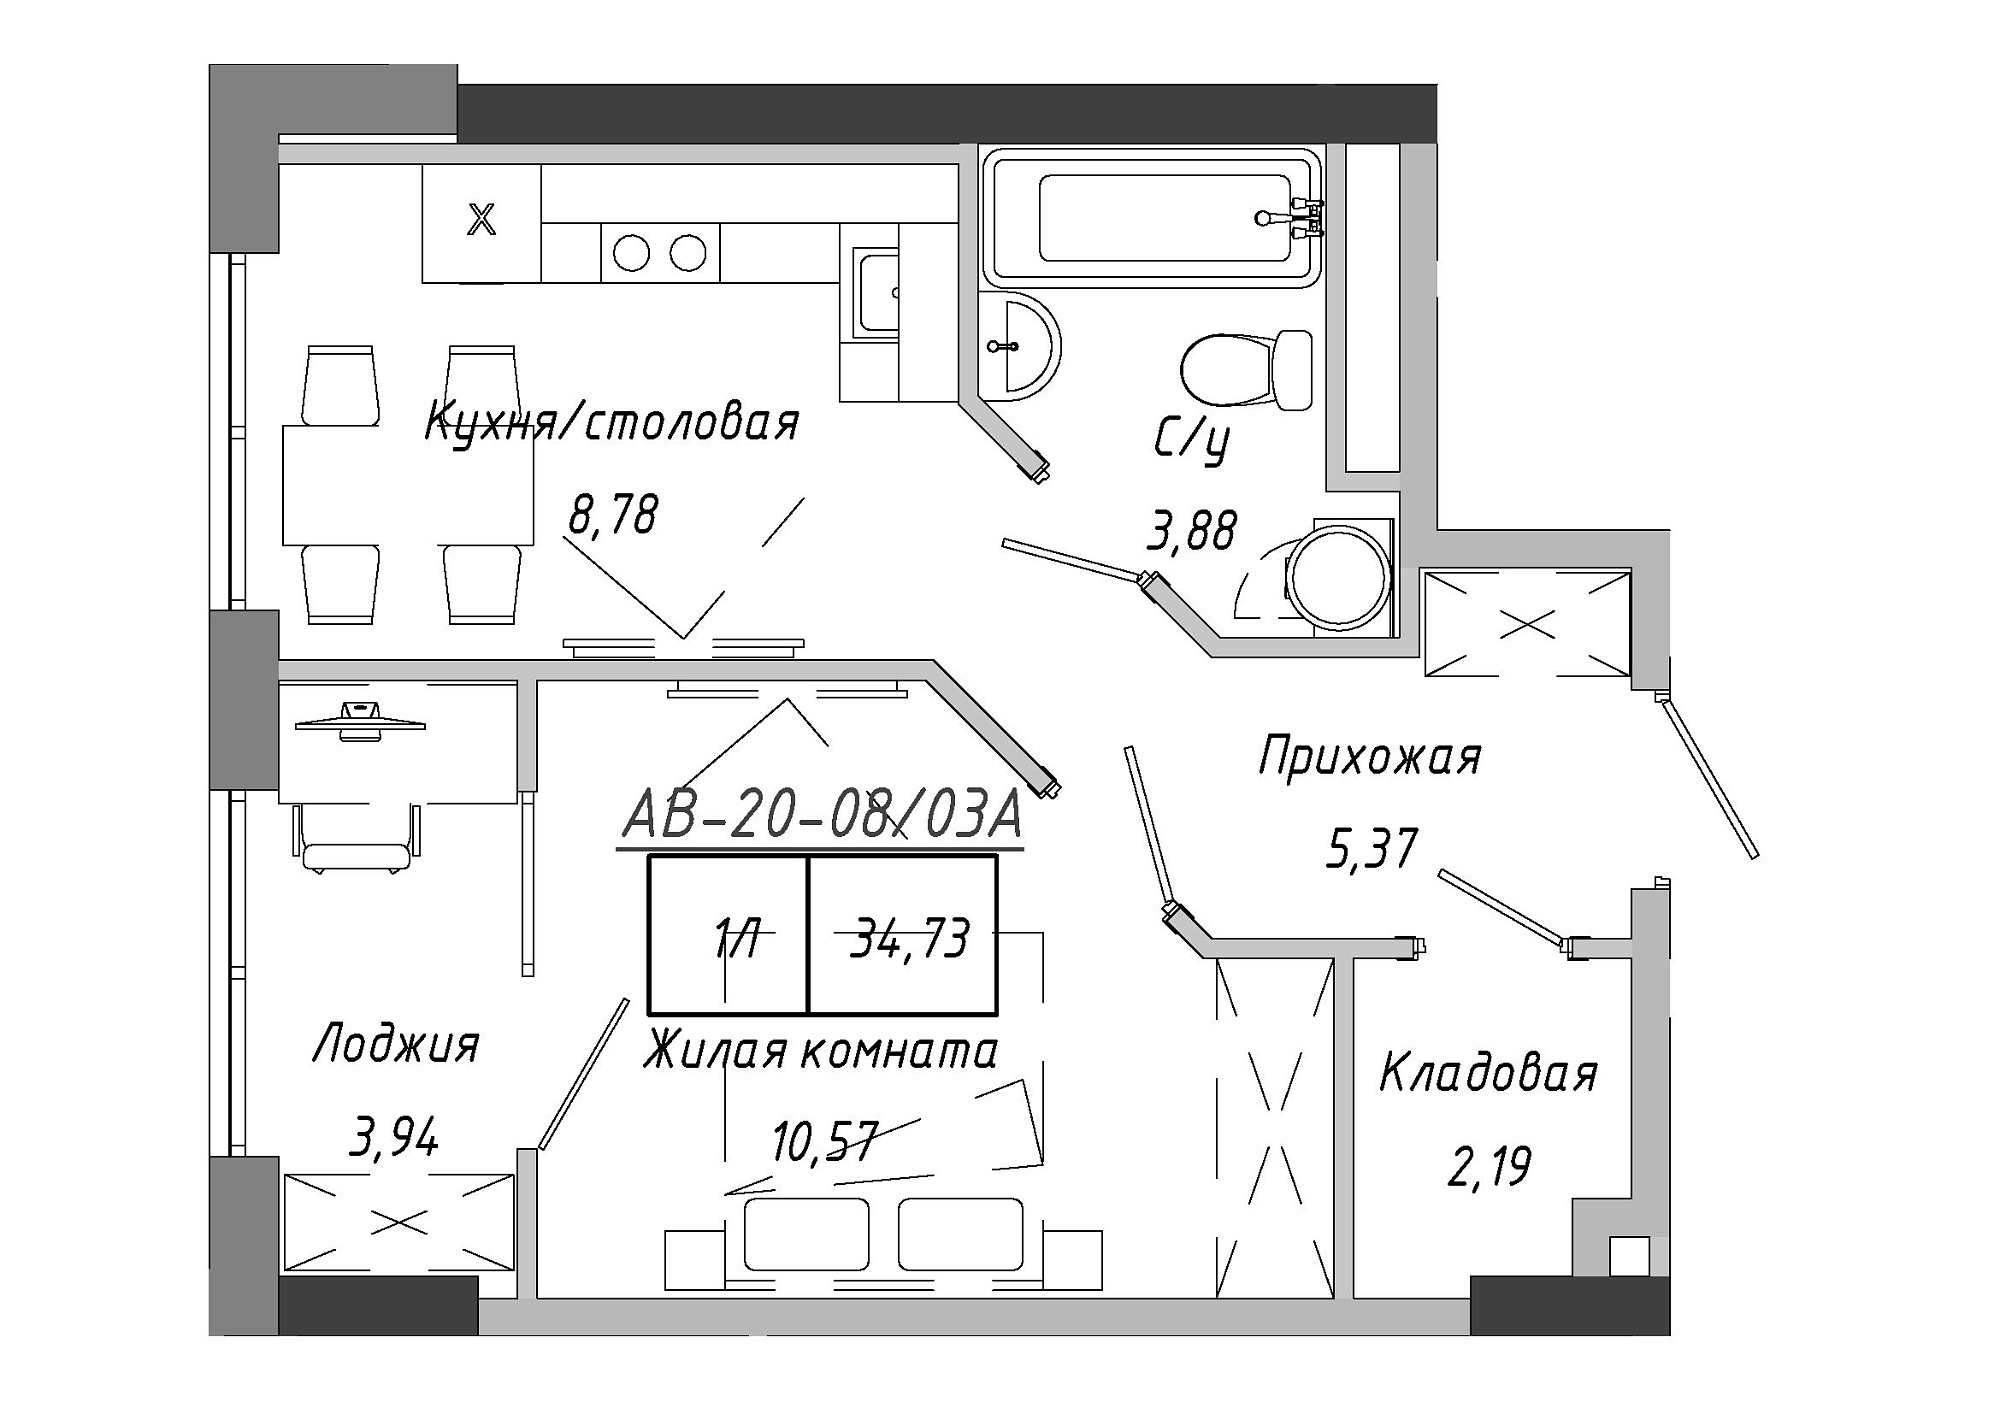 Planning 1-rm flats area 35.26m2, AB-20-08/0003а.